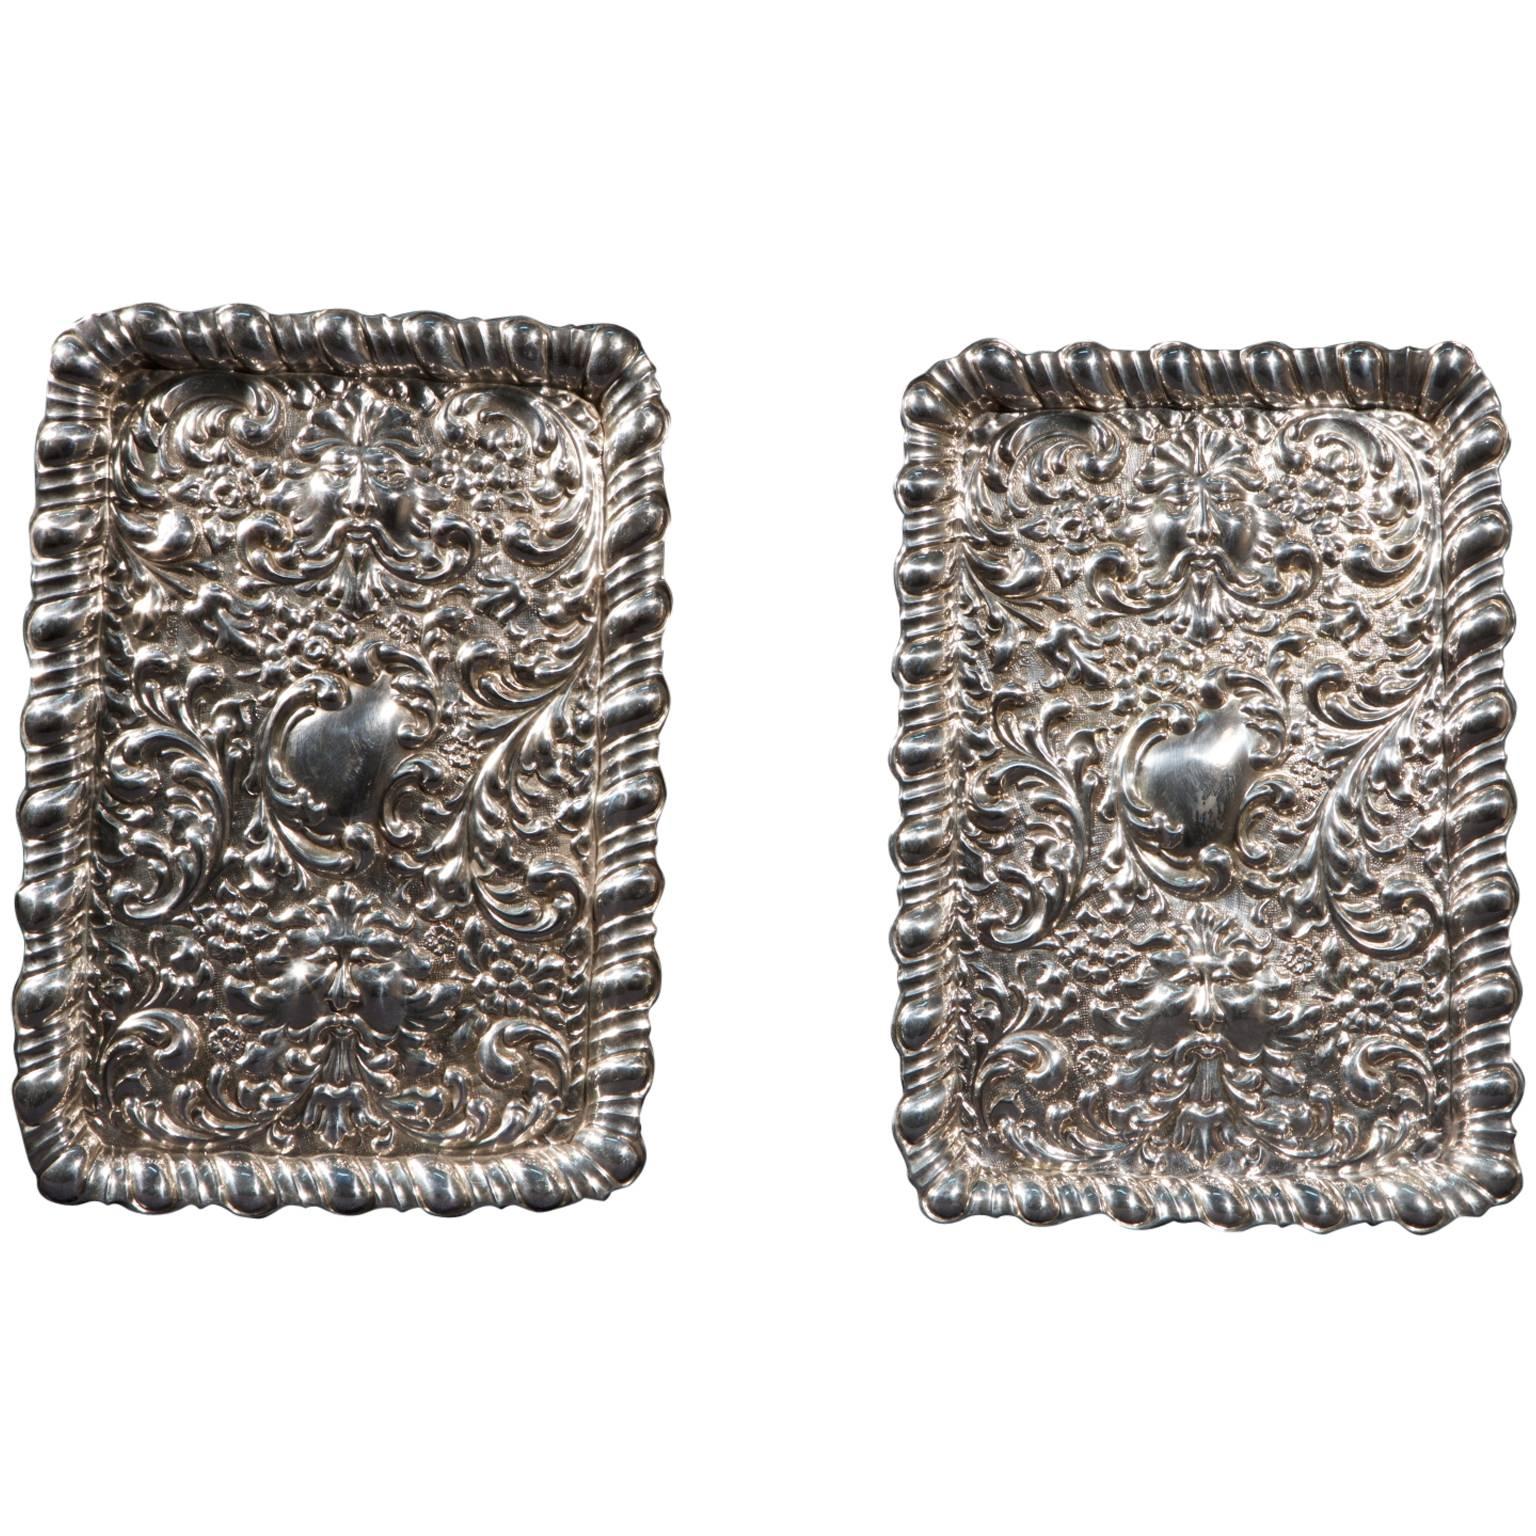   Pair of Antique English Silver Personal Cards Trays For Sale